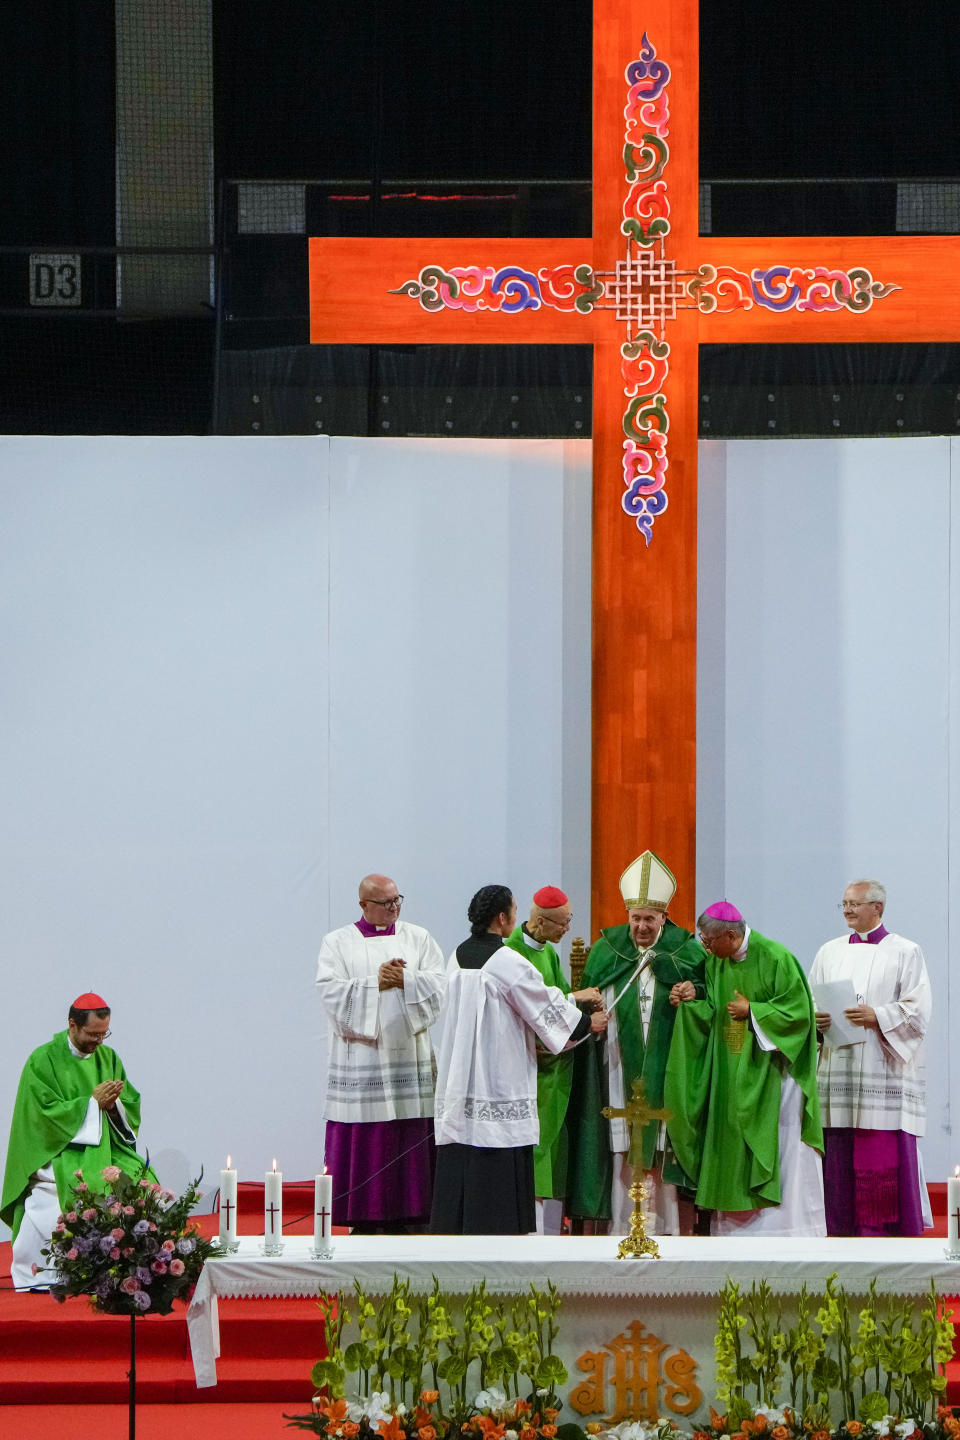 Pope Francis is joined by Cardinal John Tong Hon, at his right, and Cardinal-elect Stephen Chow, at his left, both from Hong Kong, after presiding over a mass at the Steppe Arena in the Mongolian capital Ulaanbaatar, Sunday, Sept. 3, 2023. Francis is in Mongolia to minister to one of the world's smallest and newest Catholic communities. Neighboring China's crackdown on religious minorities has been a constant backdrop to the trip, even as the Vatican hopes to focus attention instead on Mongolia and its 1,450 Catholics. At left, Apostolic Prefect for Ulaanbaatar Cardinal Giorgio Marengo looks on. (AP Photo/Ng Han Guan)